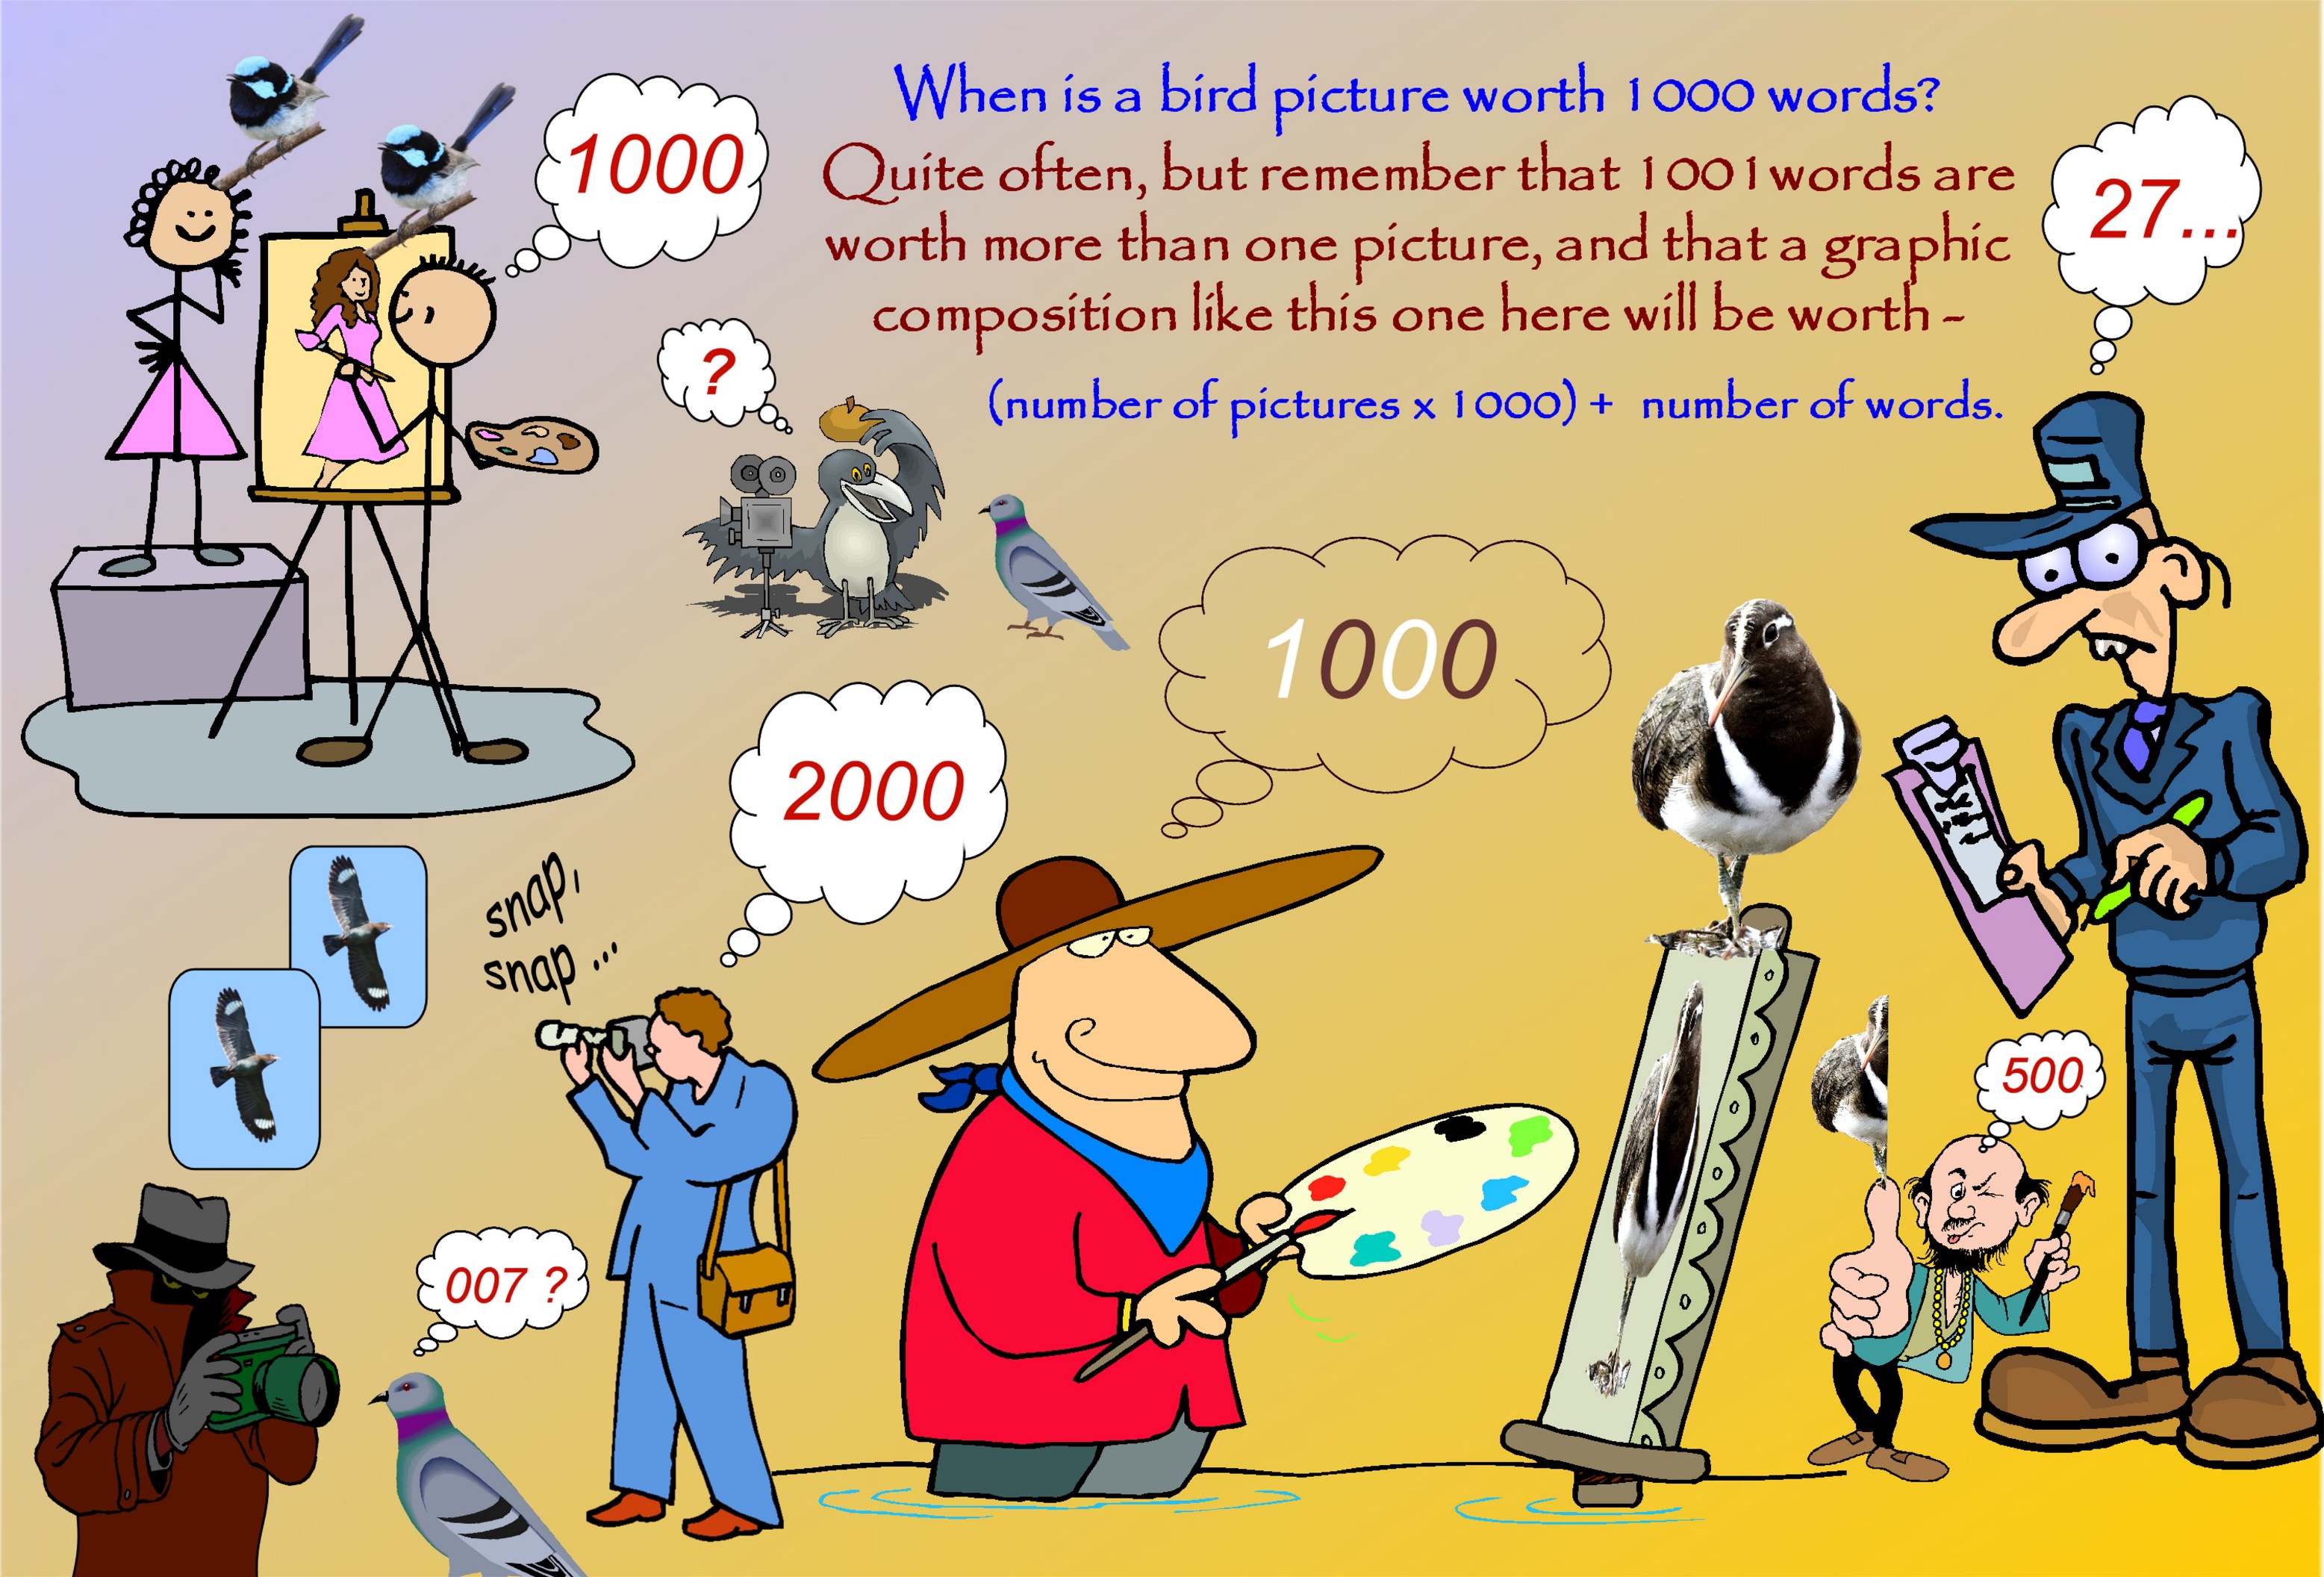 A cartoon of people painting

Description automatically generated